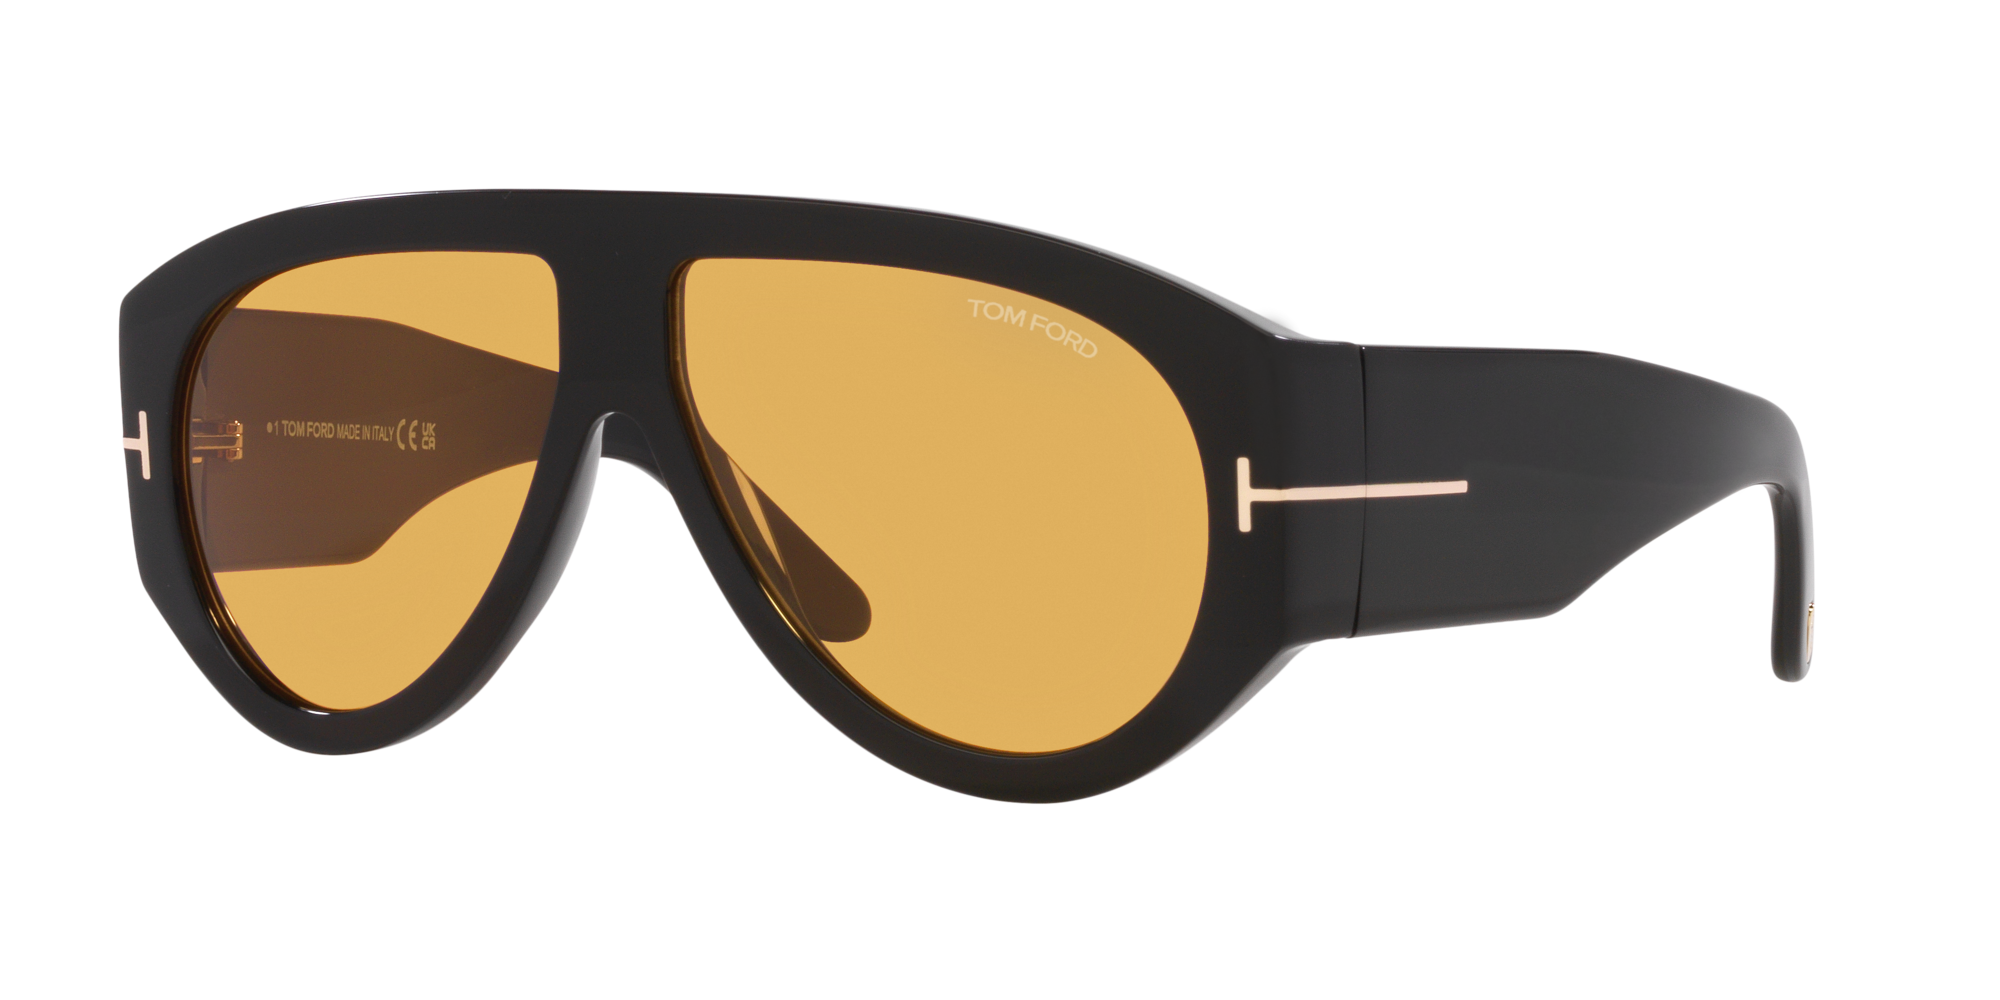 Tom Ford Sunglasses Sale: Top 10 New Models for Men in 2023 – LookerOnline